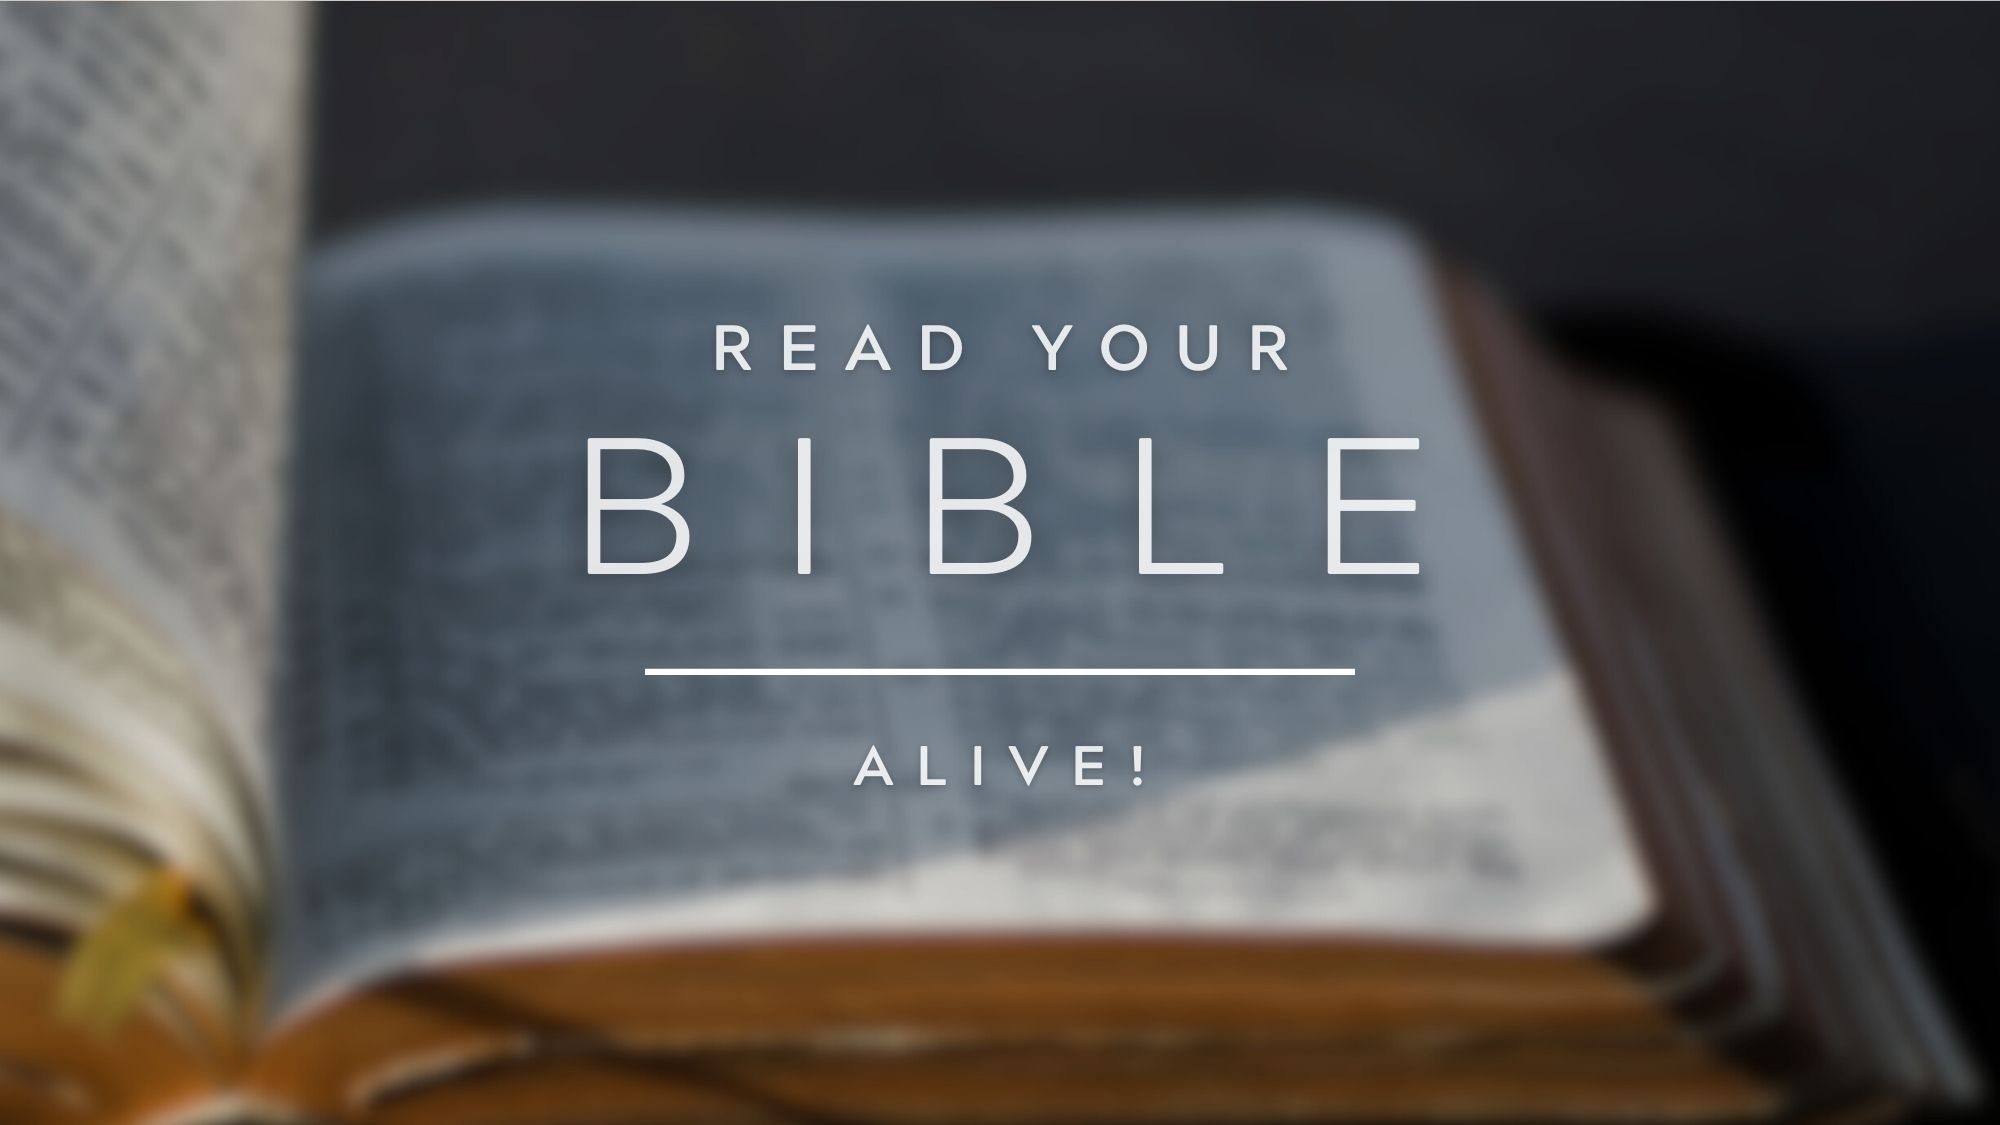 Read your Bible "Alive"